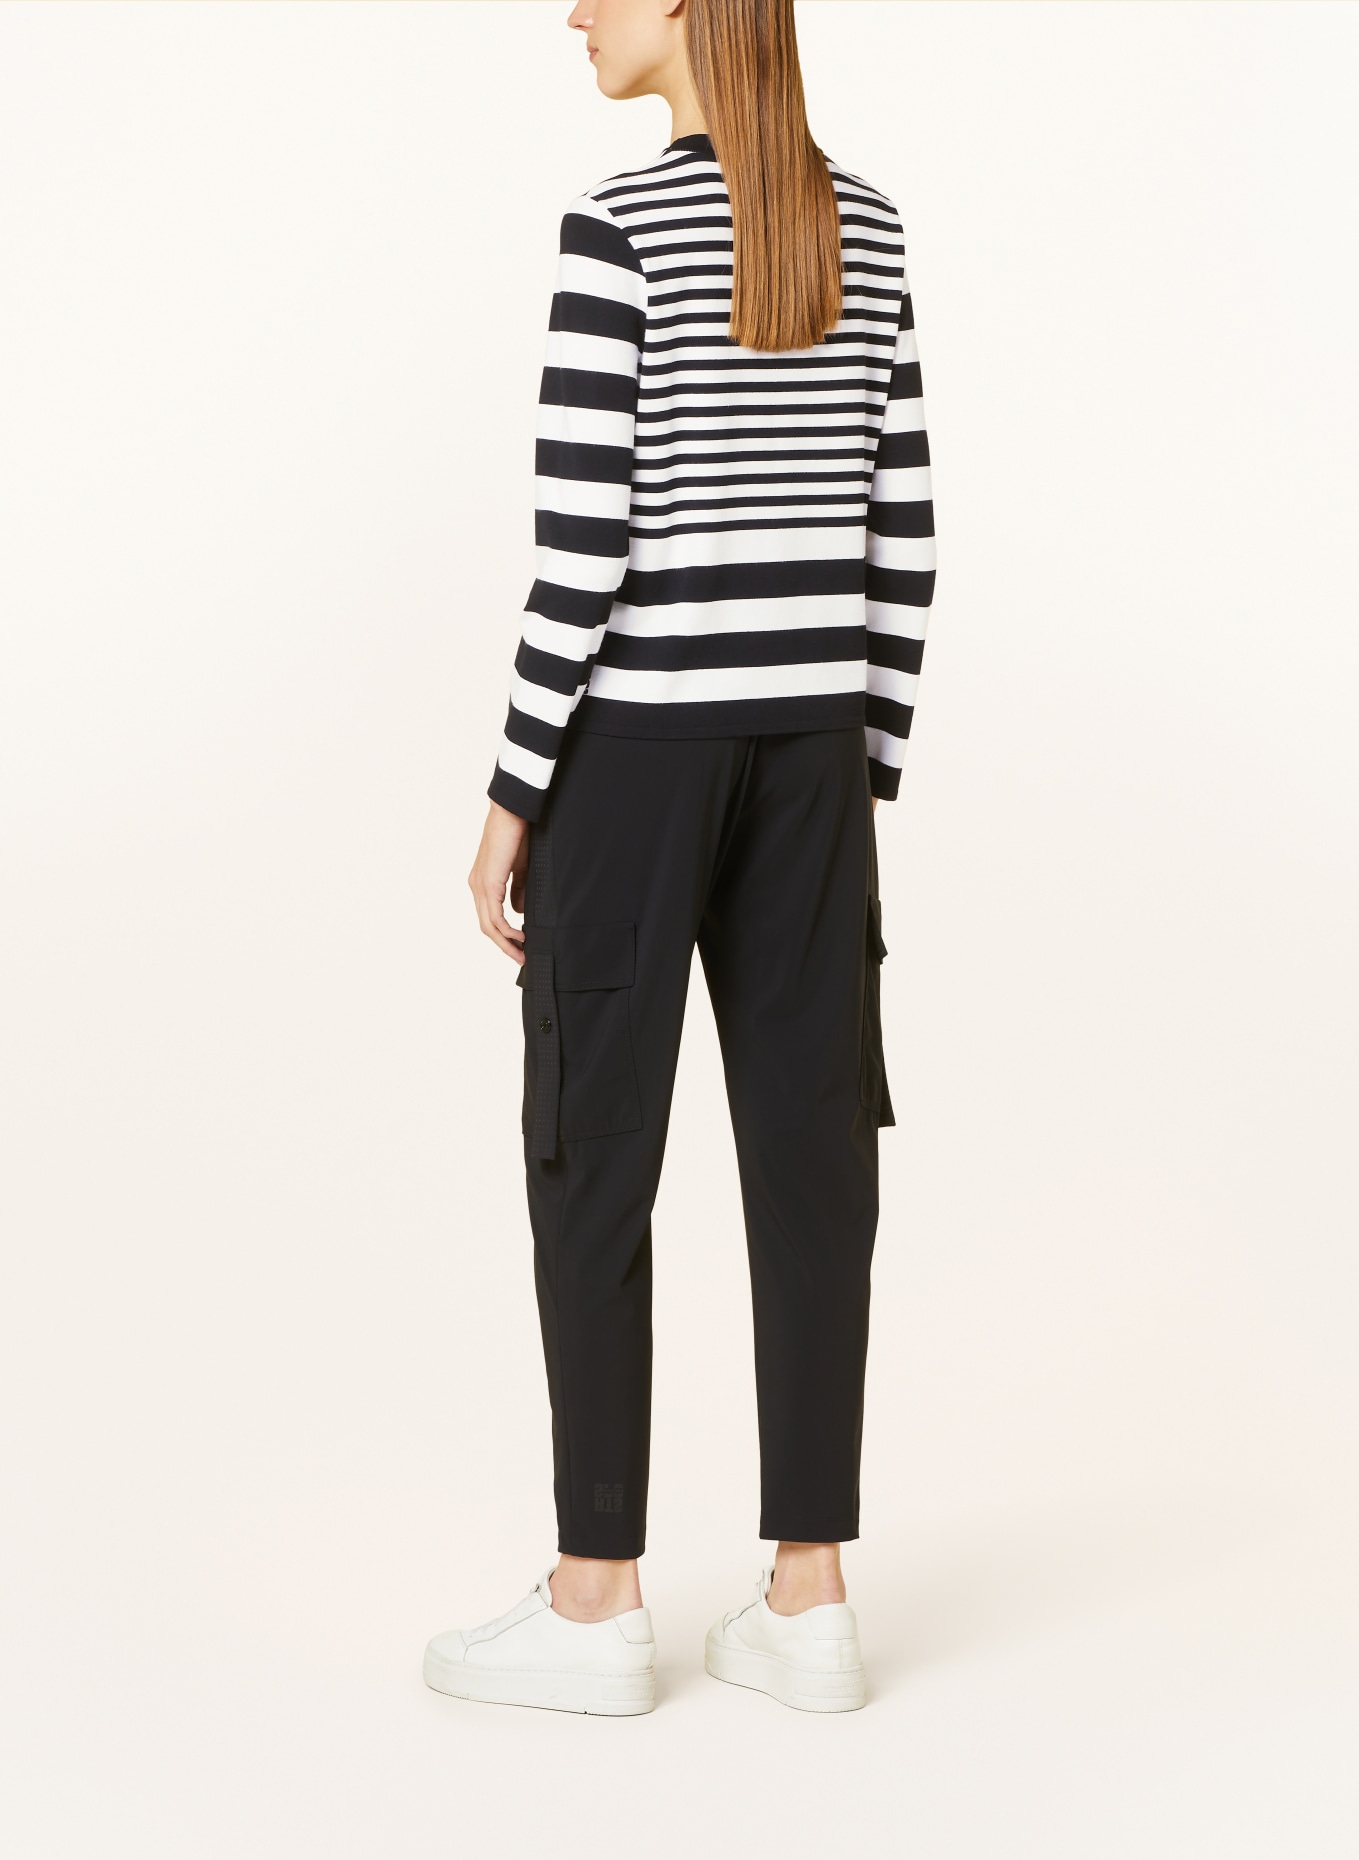 MARC CAIN Sweater, Color: 190 white and black (Image 3)